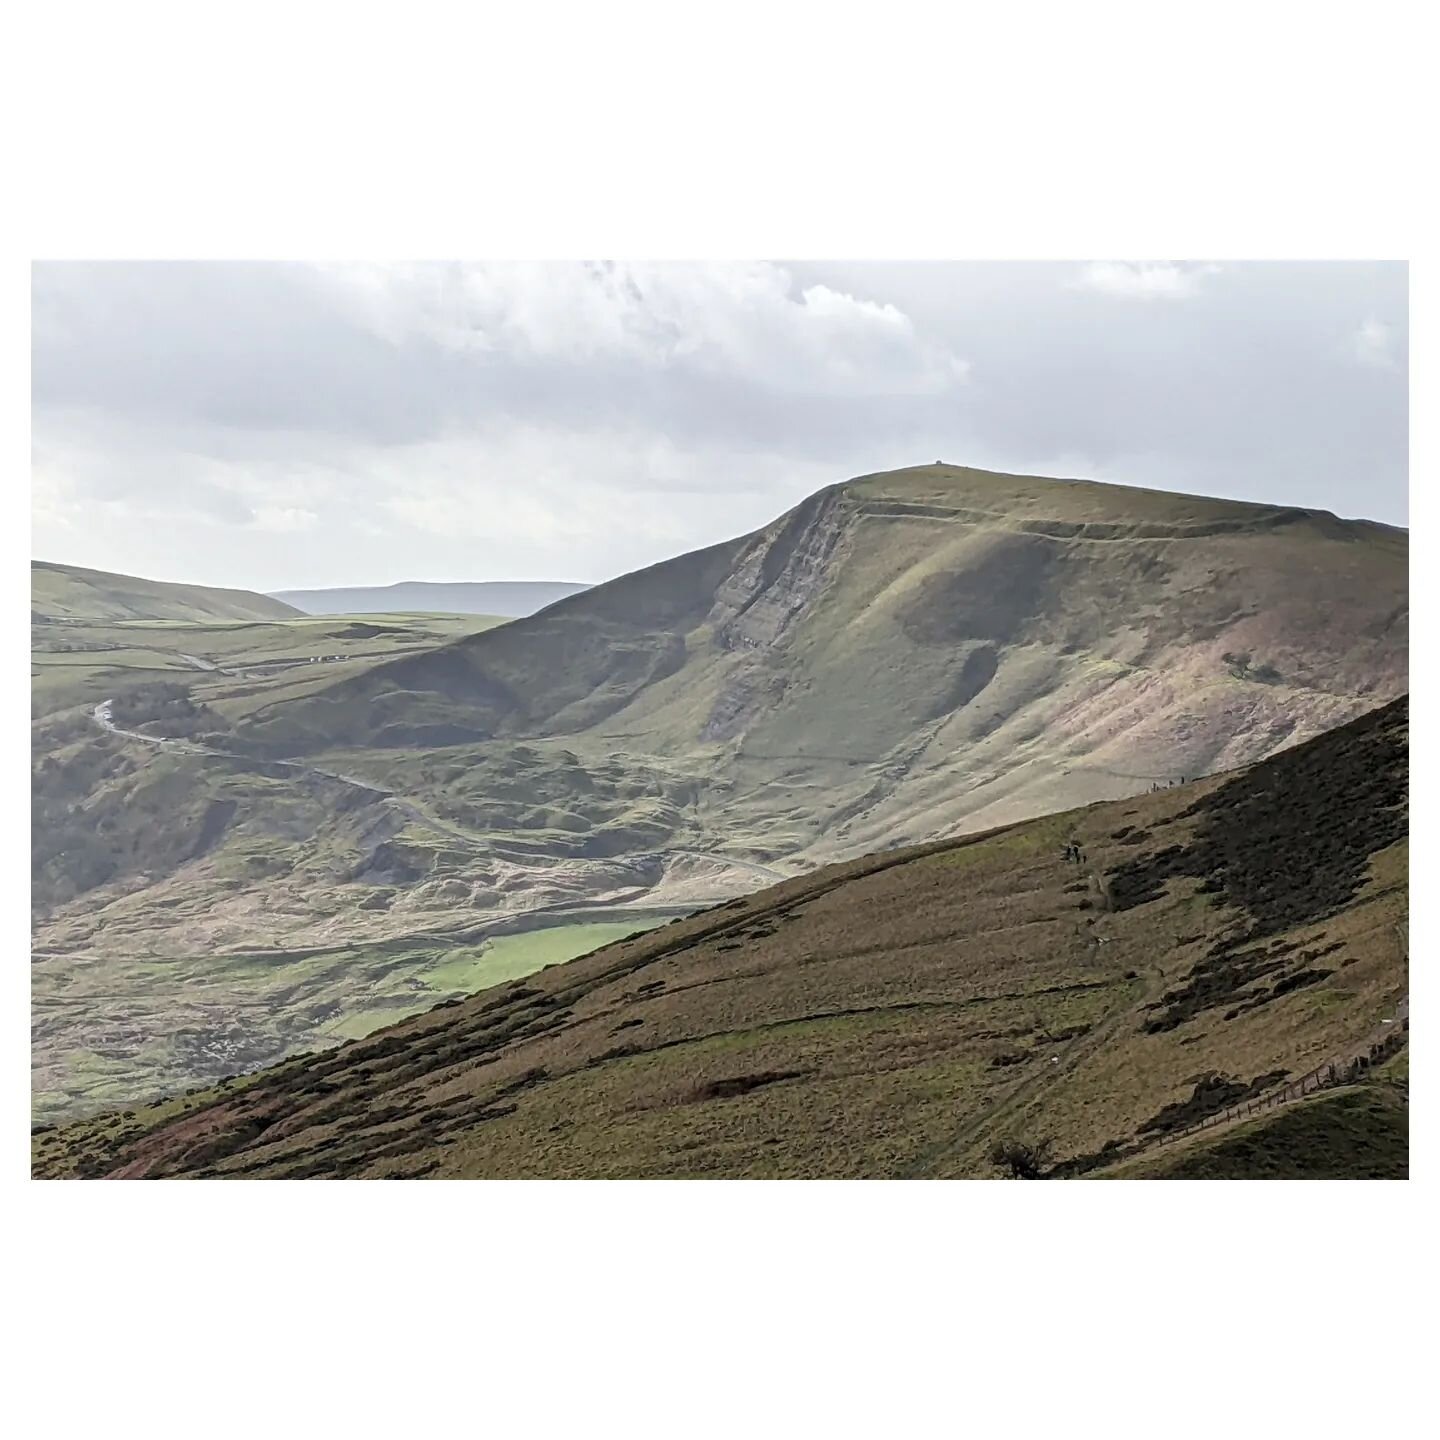 Mam Tor. Mother Hill. The Shivering Mountain.

The base of Mam Tor is composed of black&nbsp;shales&nbsp;of the&nbsp;Bowland Shale Formation&nbsp;of&nbsp;Serpukhovian&nbsp;age overlain by&nbsp;turbiditic&nbsp;sandstone&nbsp;of the Mam Tor Sandstone F